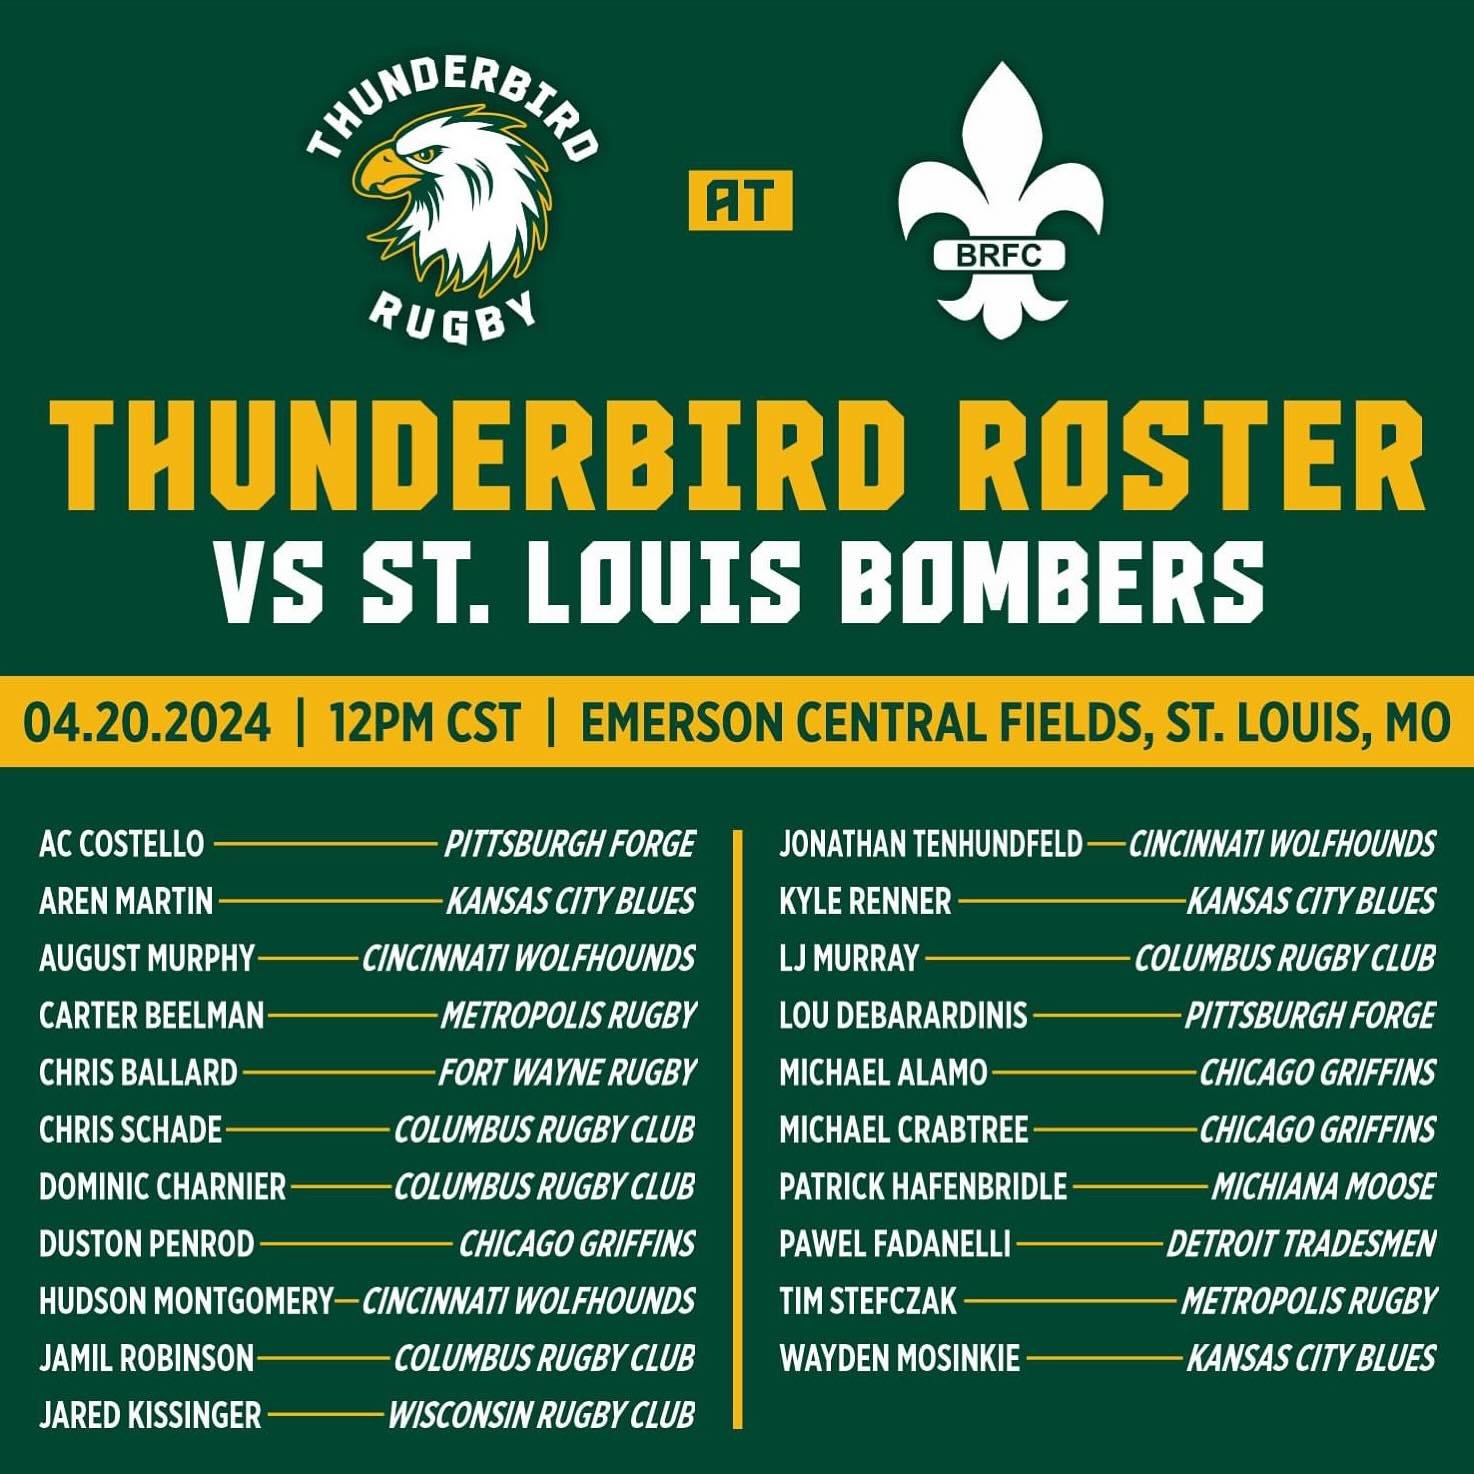 Congratulations to our brother Pawel Fadanelli on his selection to the @midwestrugby Thunderbirds for their match this weekend against @stl_bombersrfc !

#FAMILY